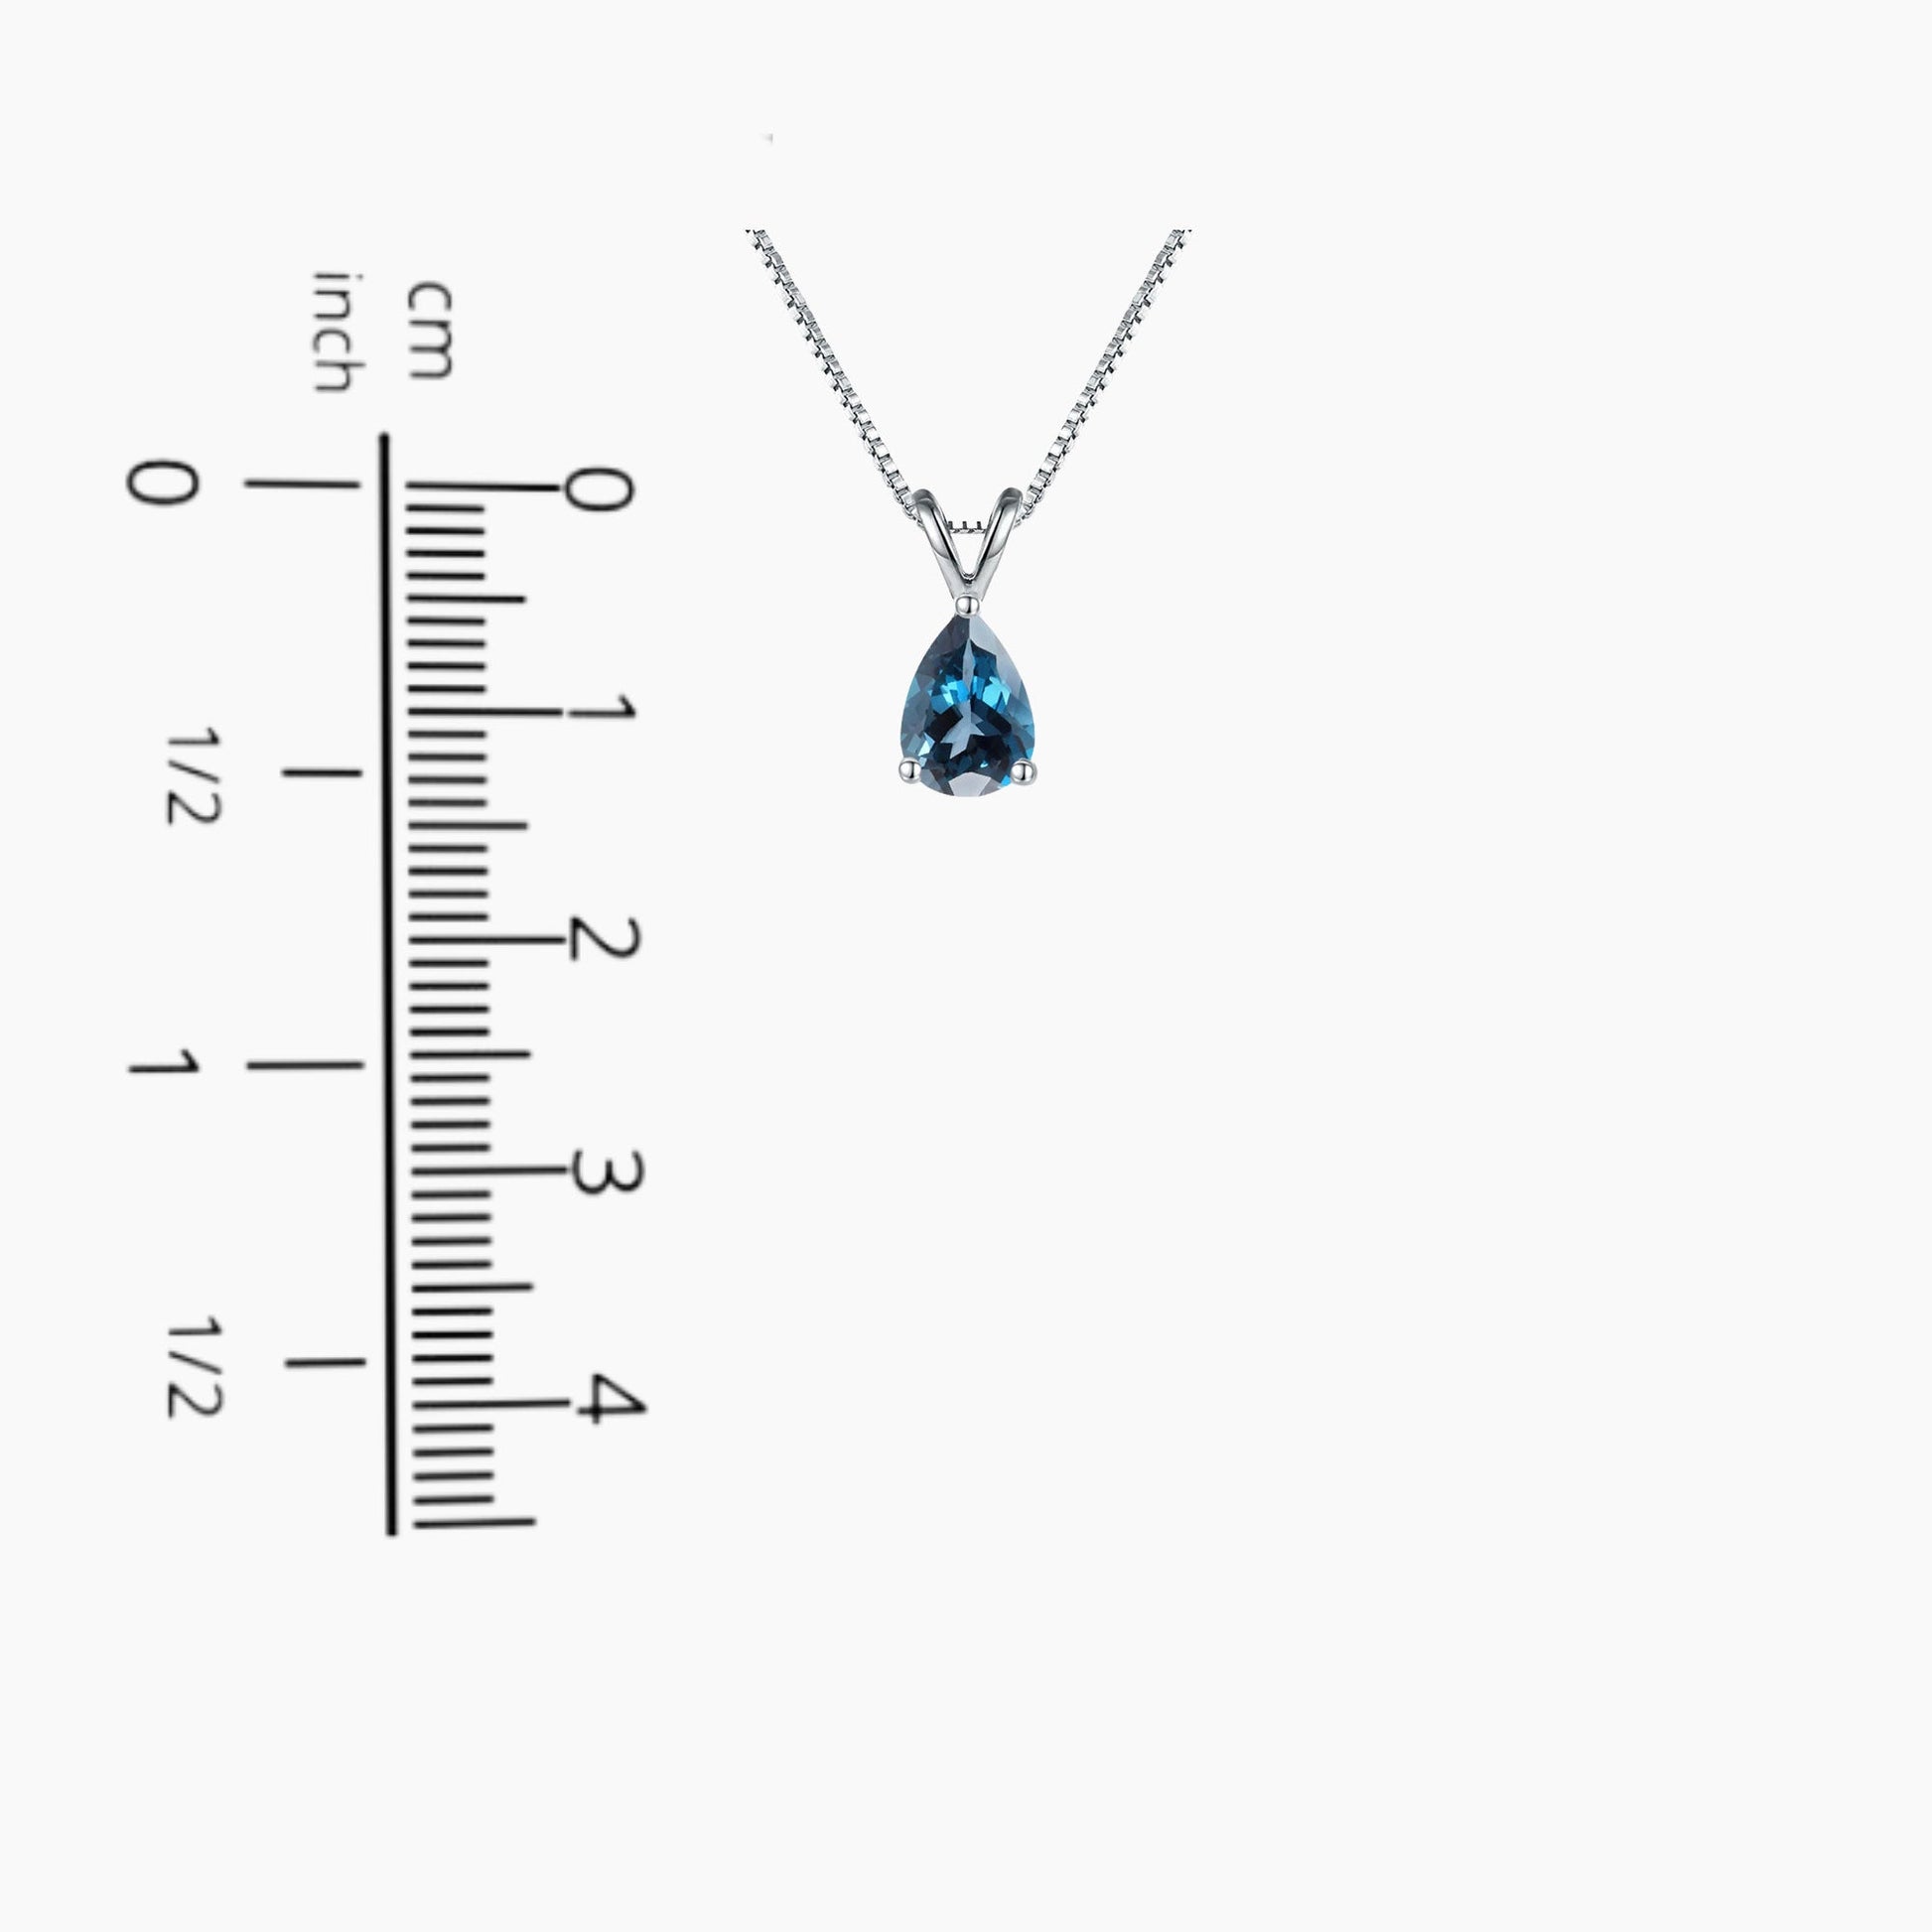 Pear Cut London Blue Topaz Pendant displayed next to a scale for size comparison